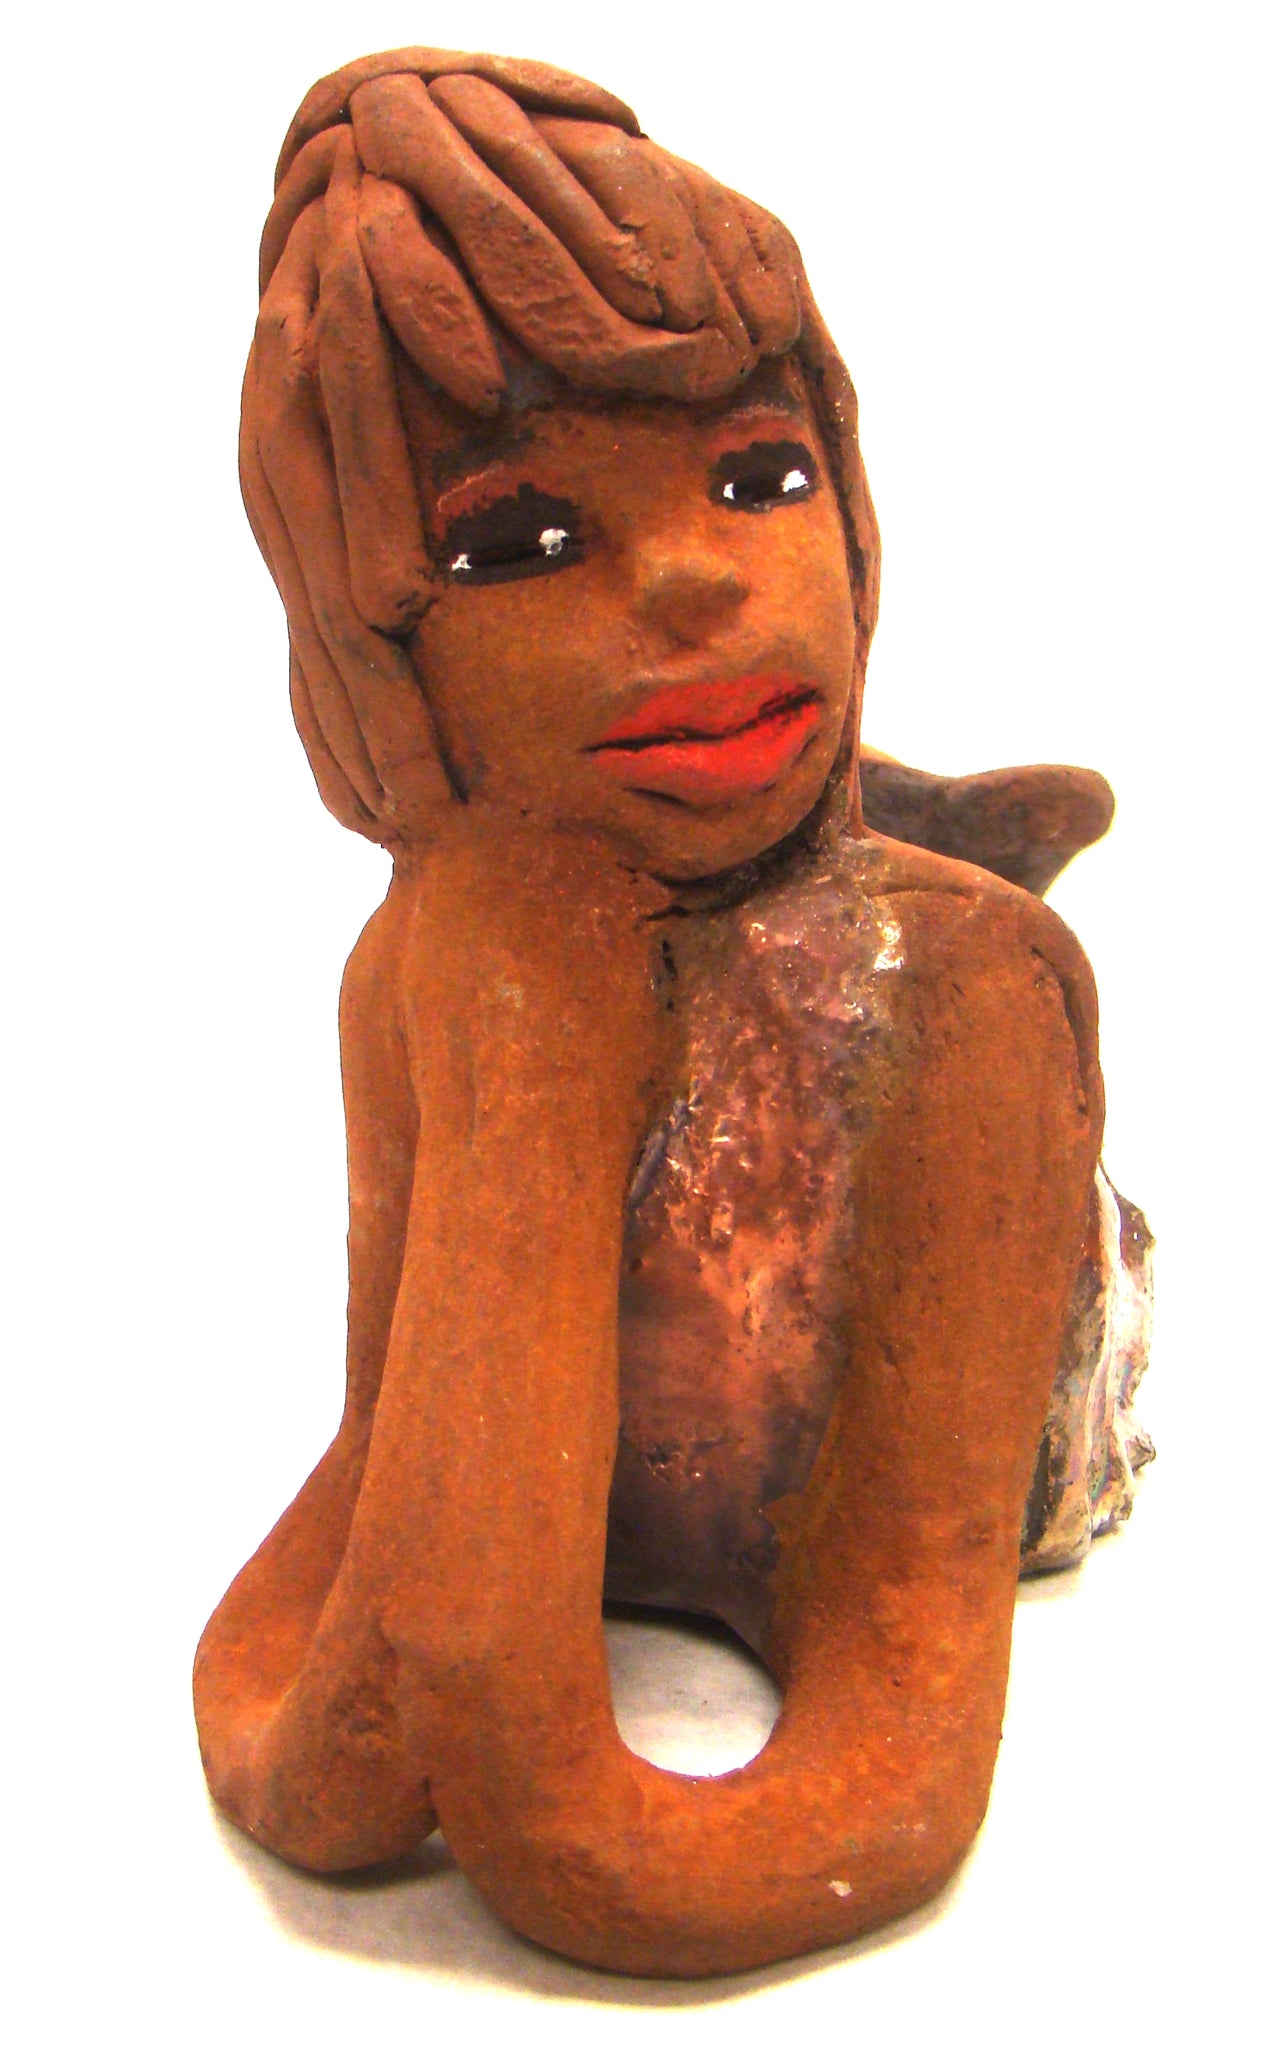     Ada stands 6" x 3.5" x 7.5" and weighs 1.11 lbs.     Ada has a lovely honey brown complexion with ruby red lips..     Her long loving arms are underneath her face as she ponders.     Ada dress is a copper glazed and she has hair made of clay.     Ada is bright eyed and ready to be placed in a good home.